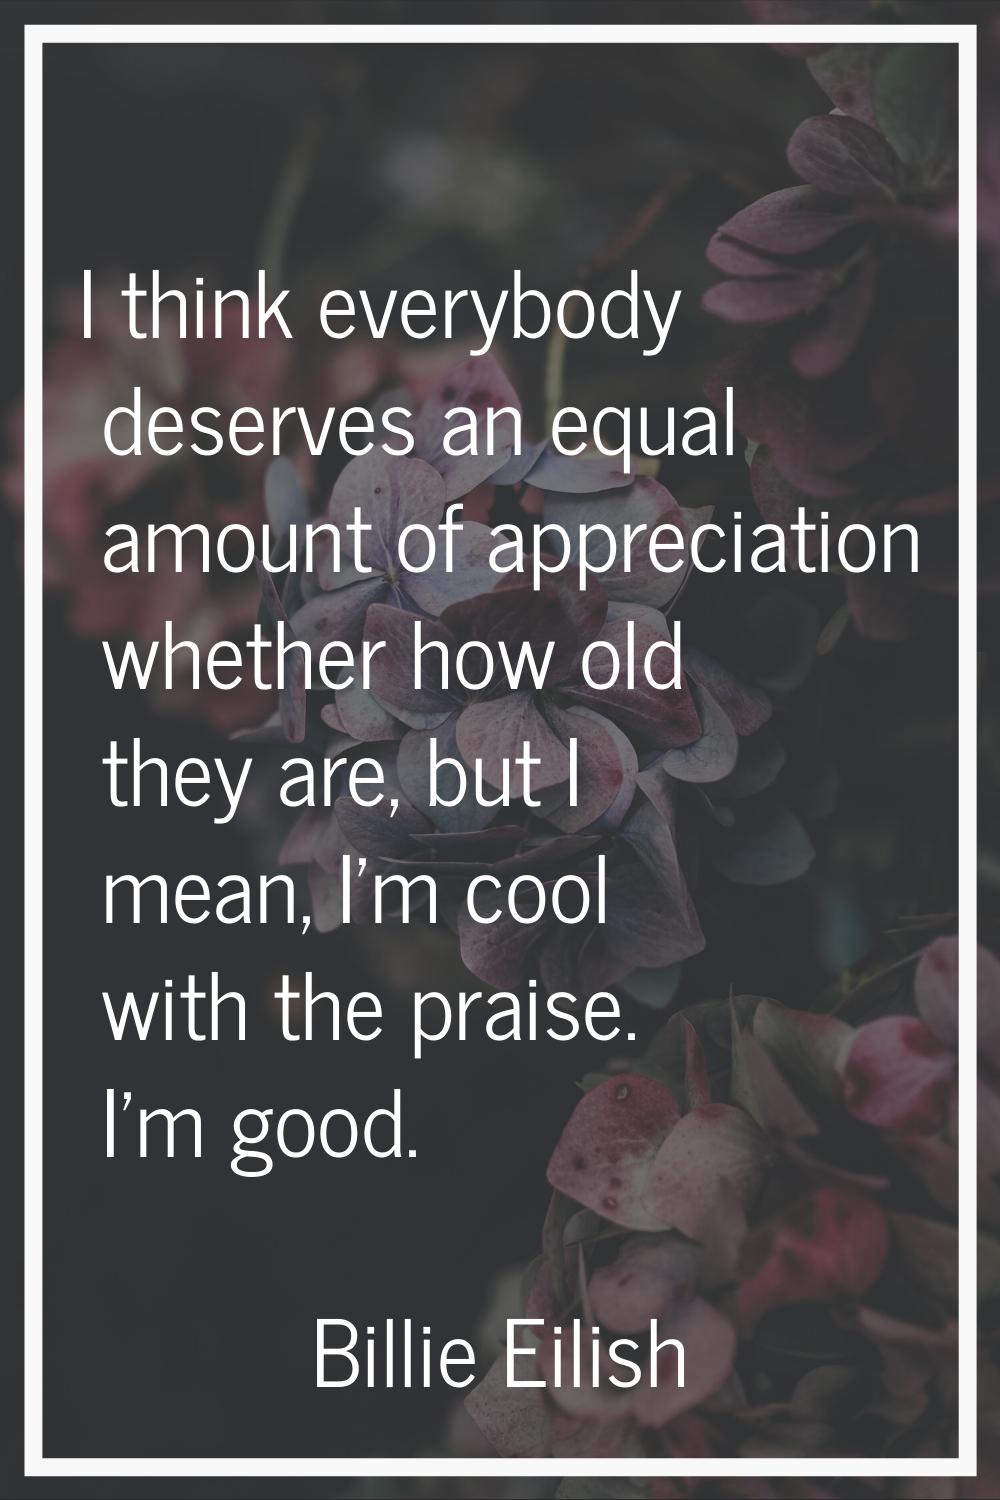 I think everybody deserves an equal amount of appreciation whether how old they are, but I mean, I'